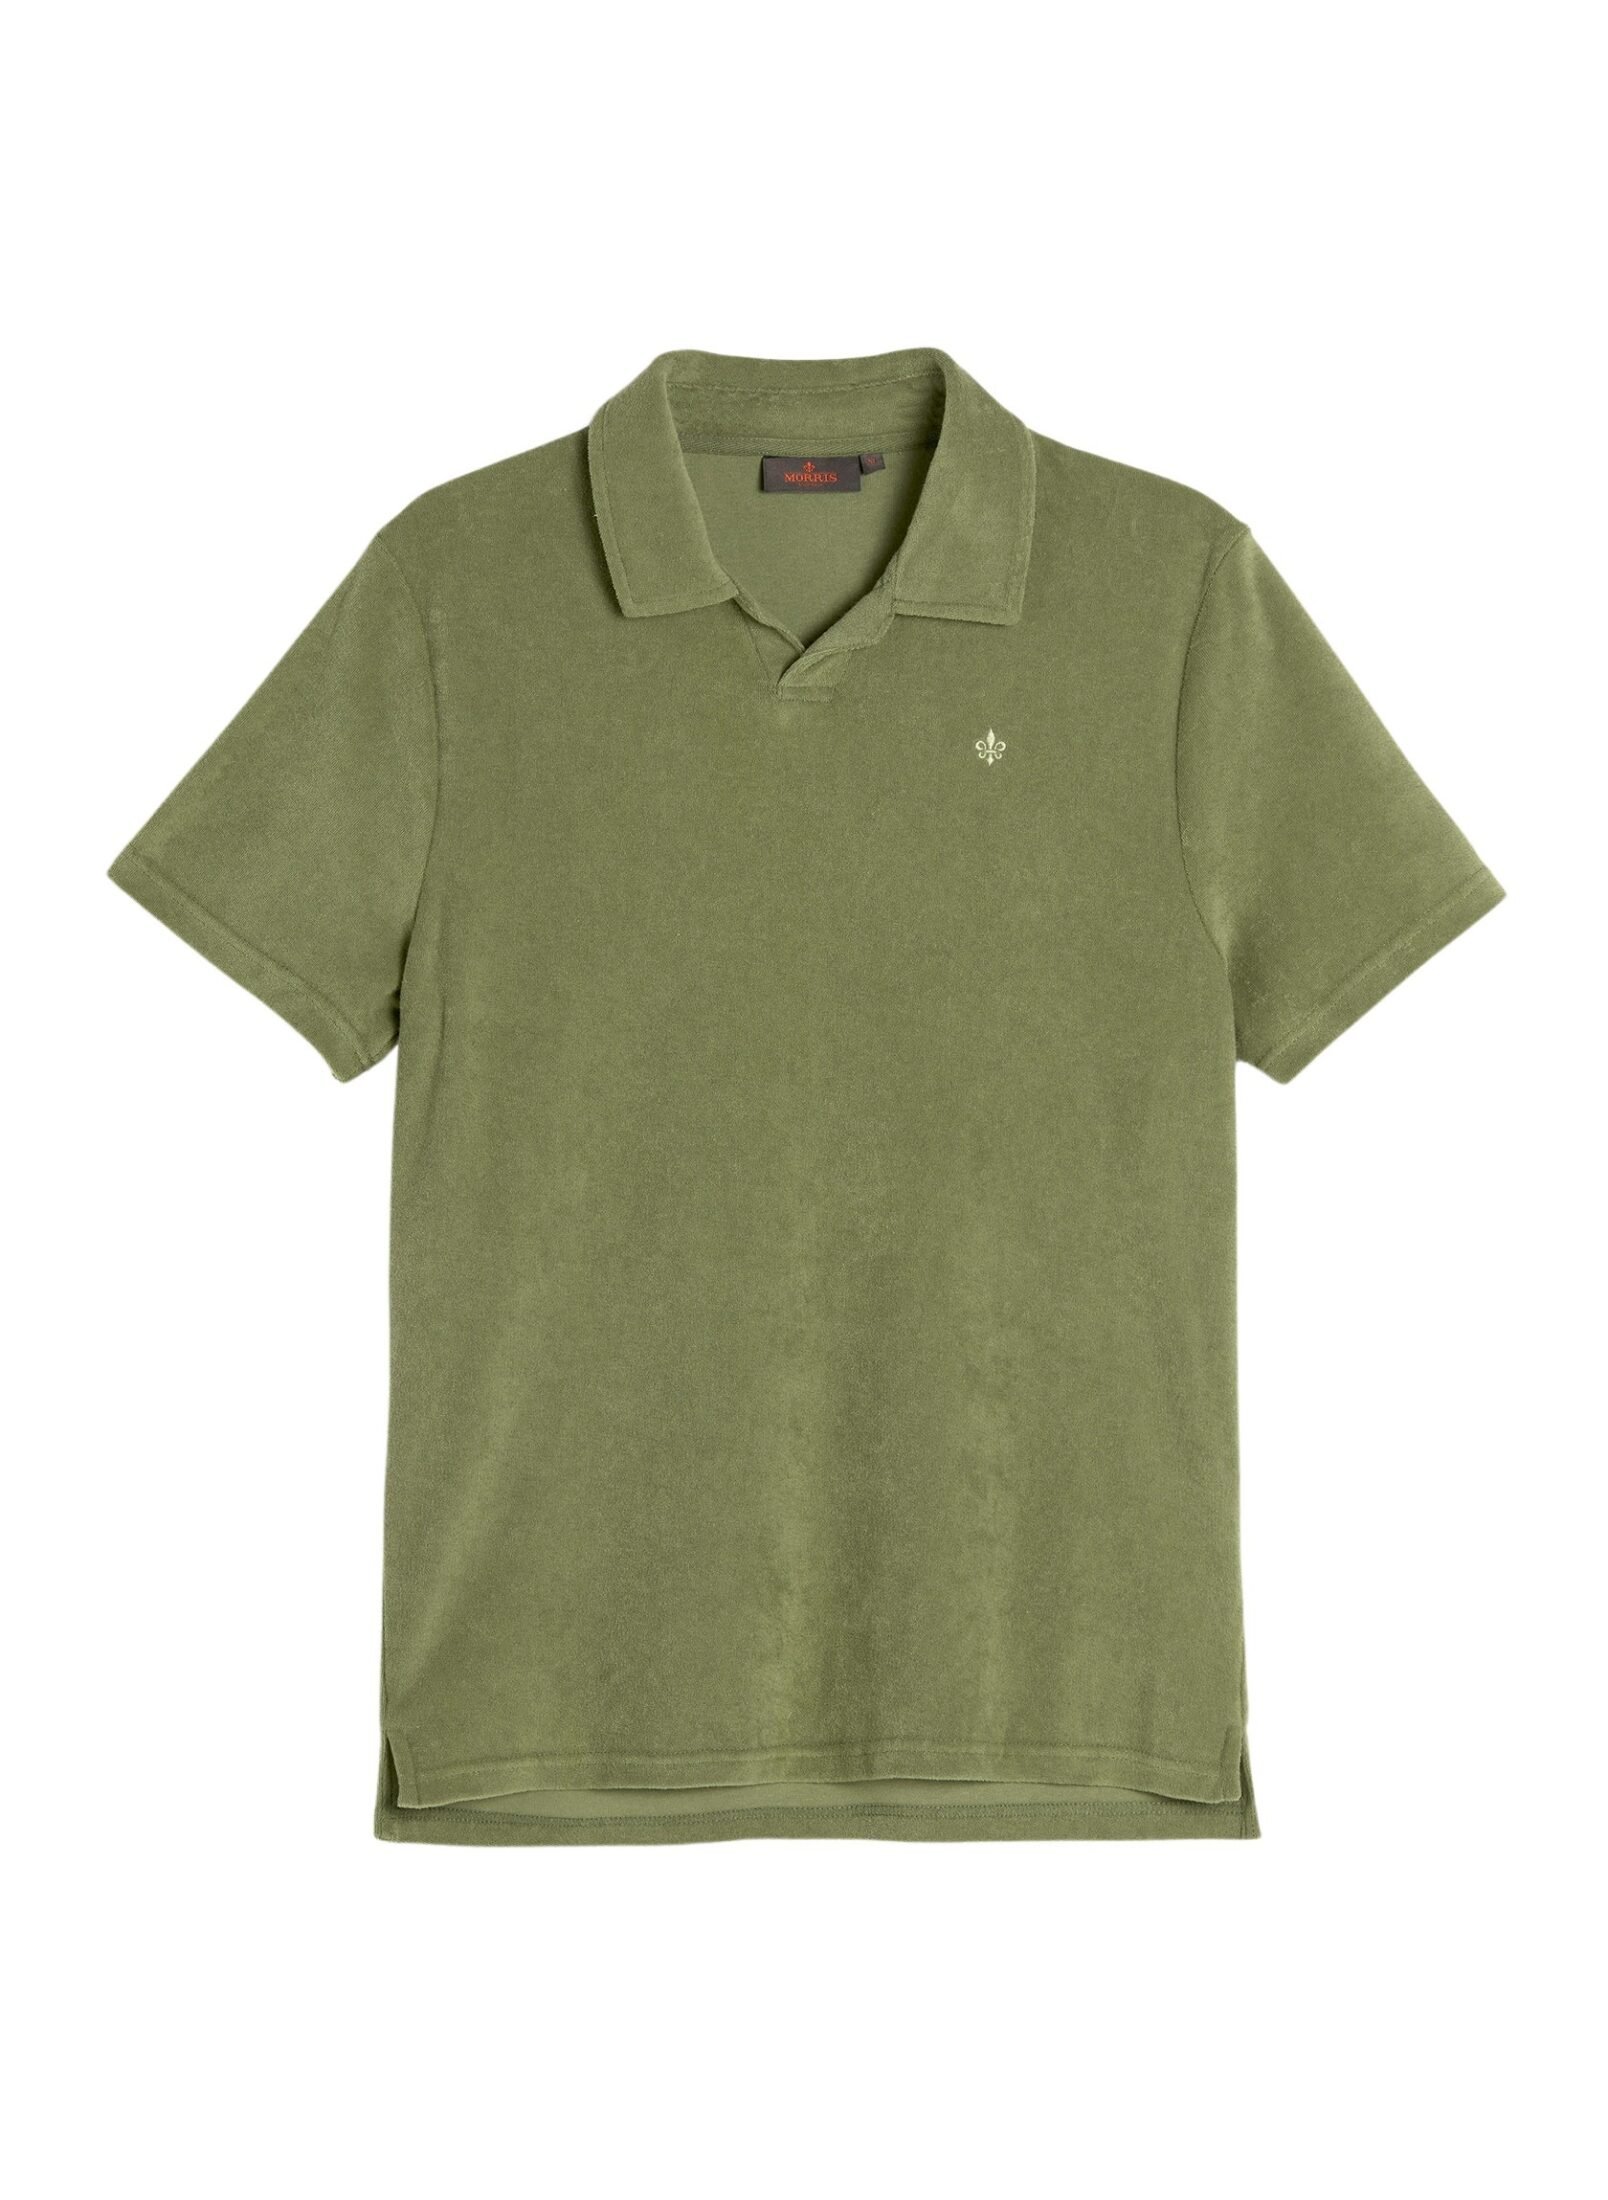 300169-delon-terry-jersey-shirt-75-olive-1